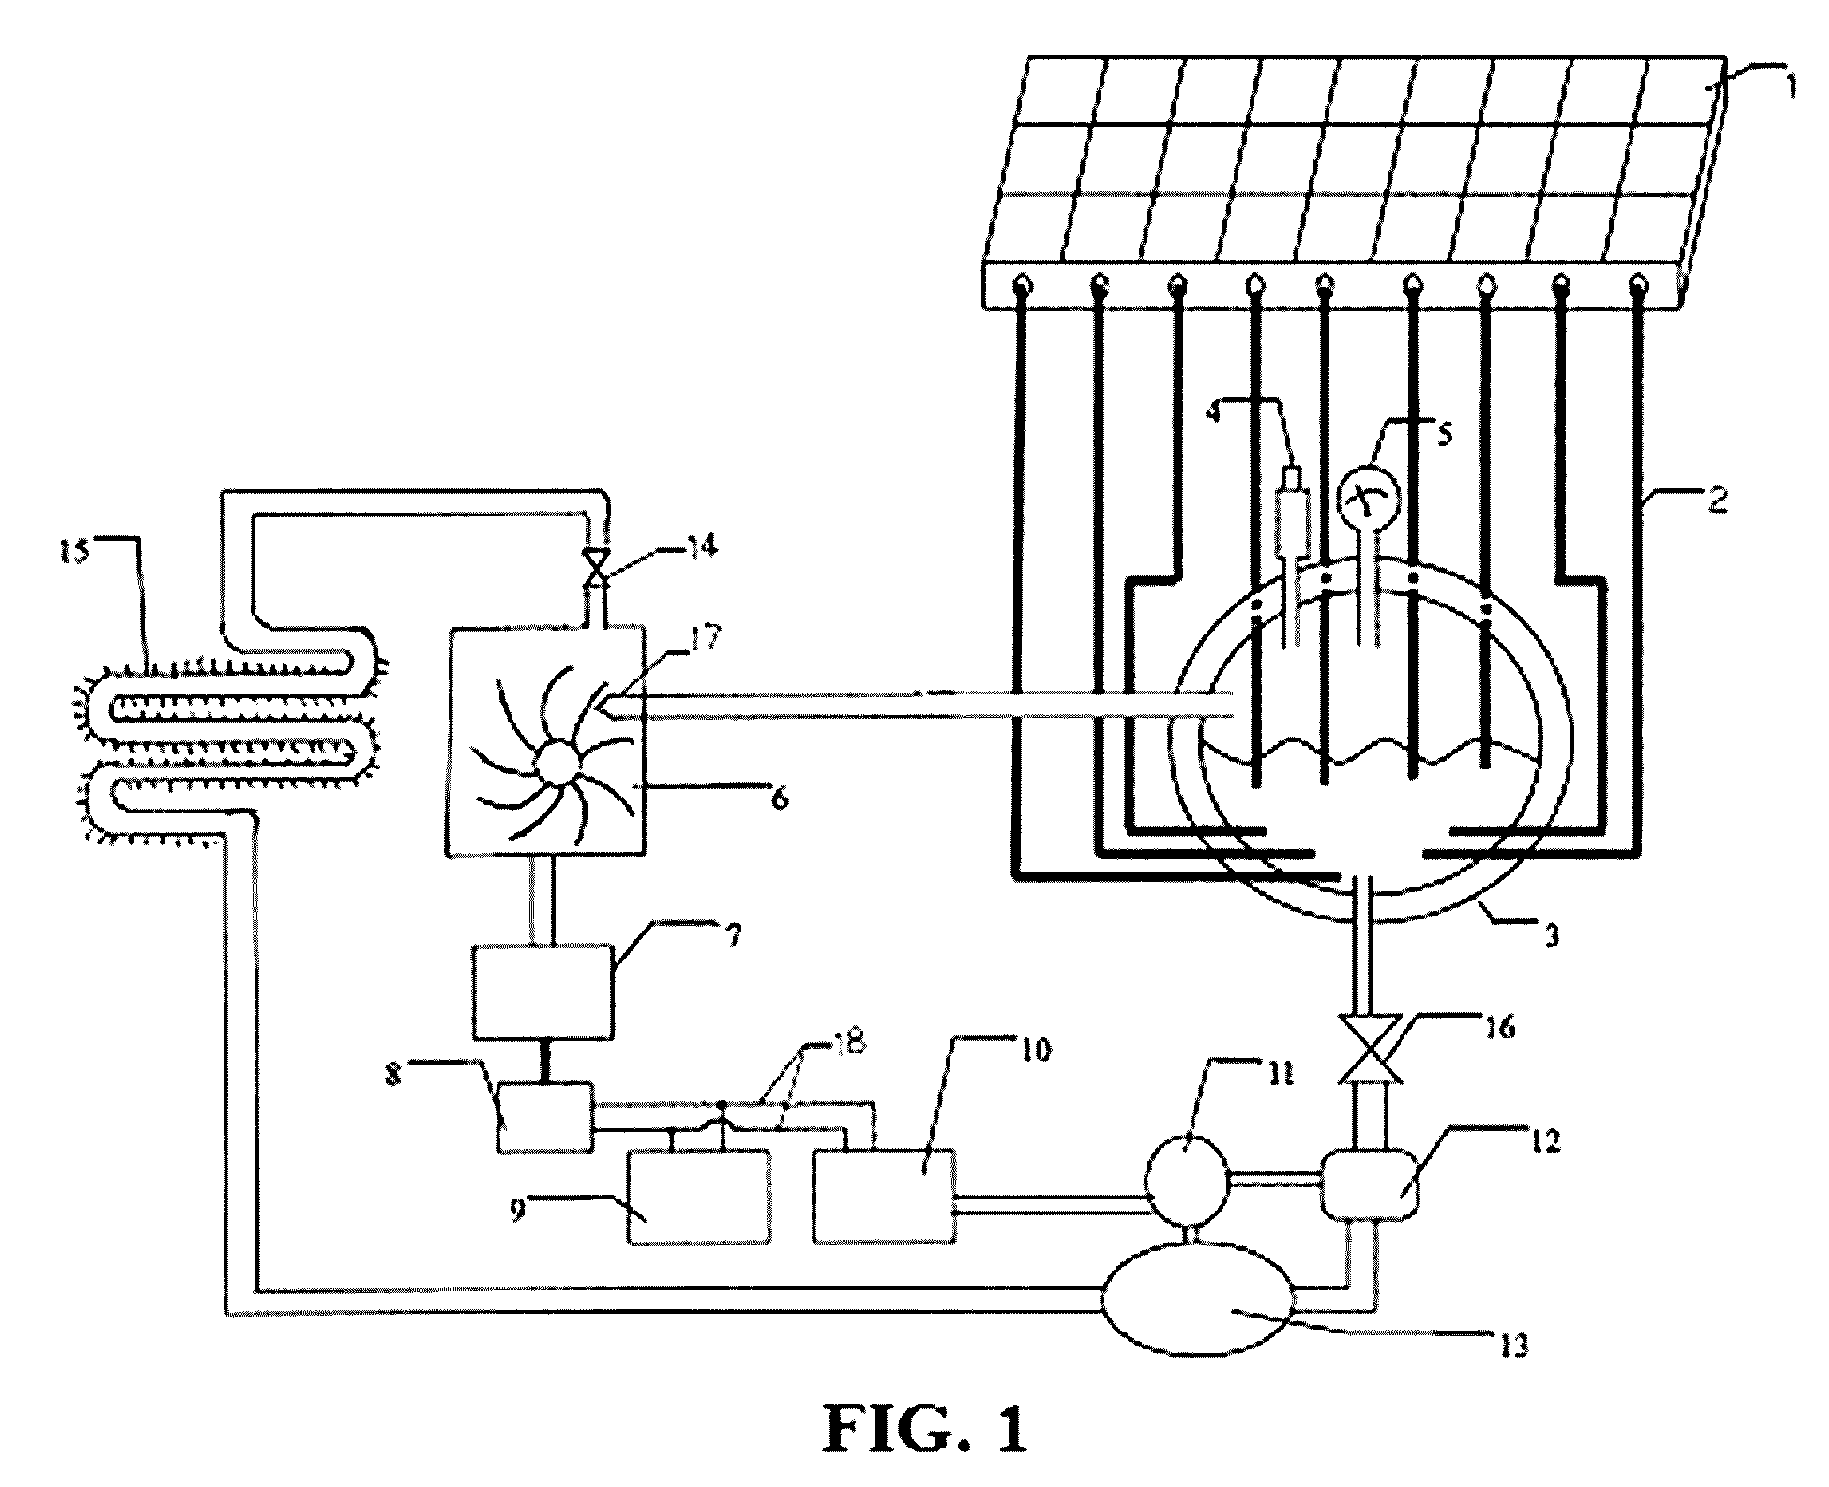 Method of generating power from naturally occurring heat without fuels and motors using the same